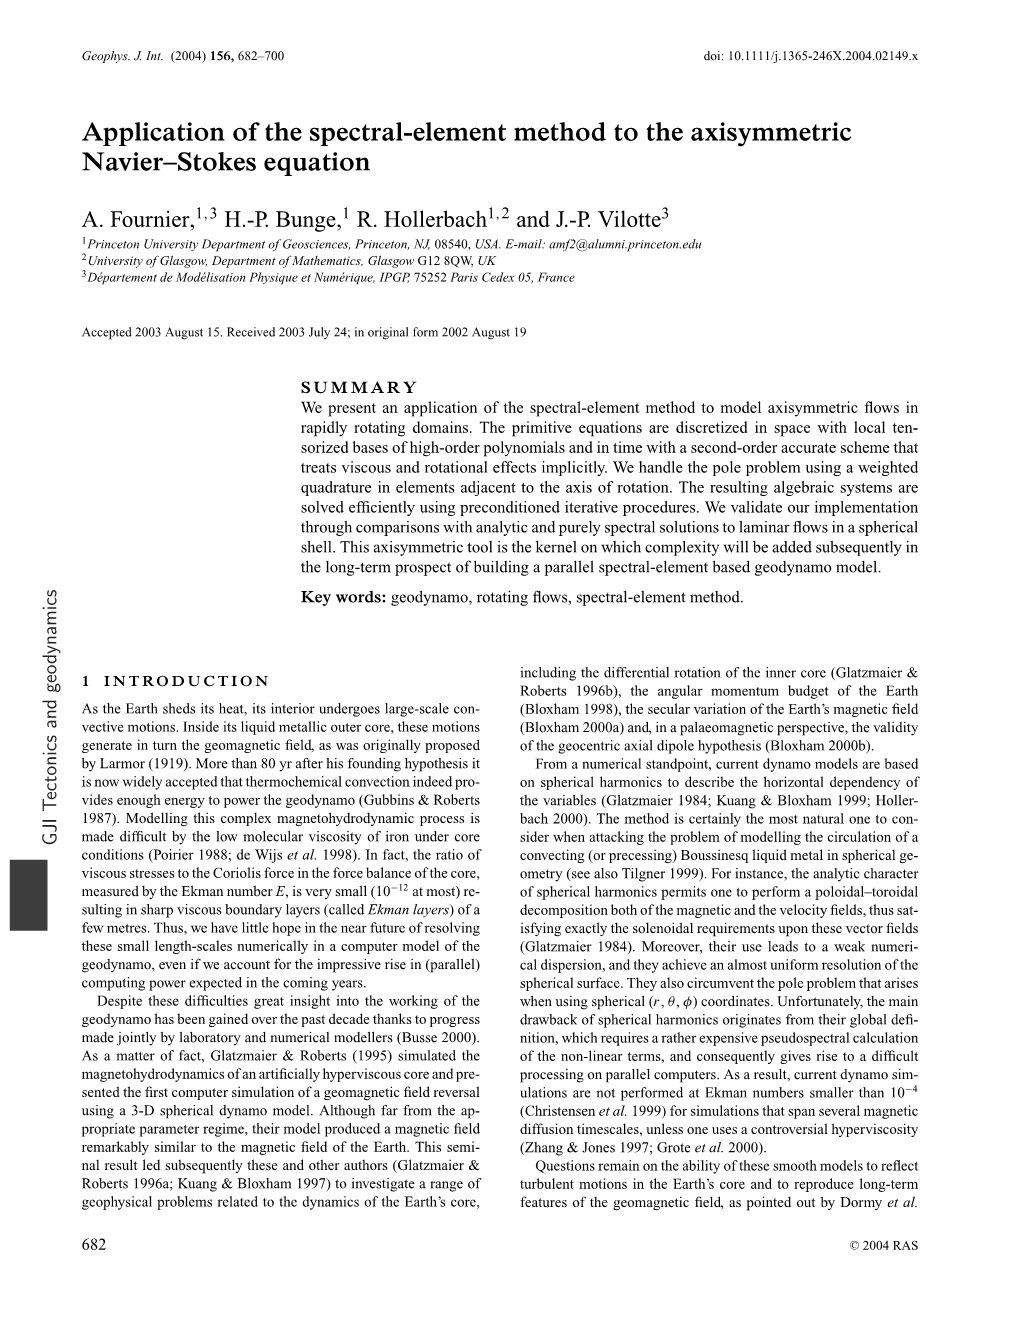 Application of the Spectral-Element Method to the Axisymmetric Navier–Stokes Equation